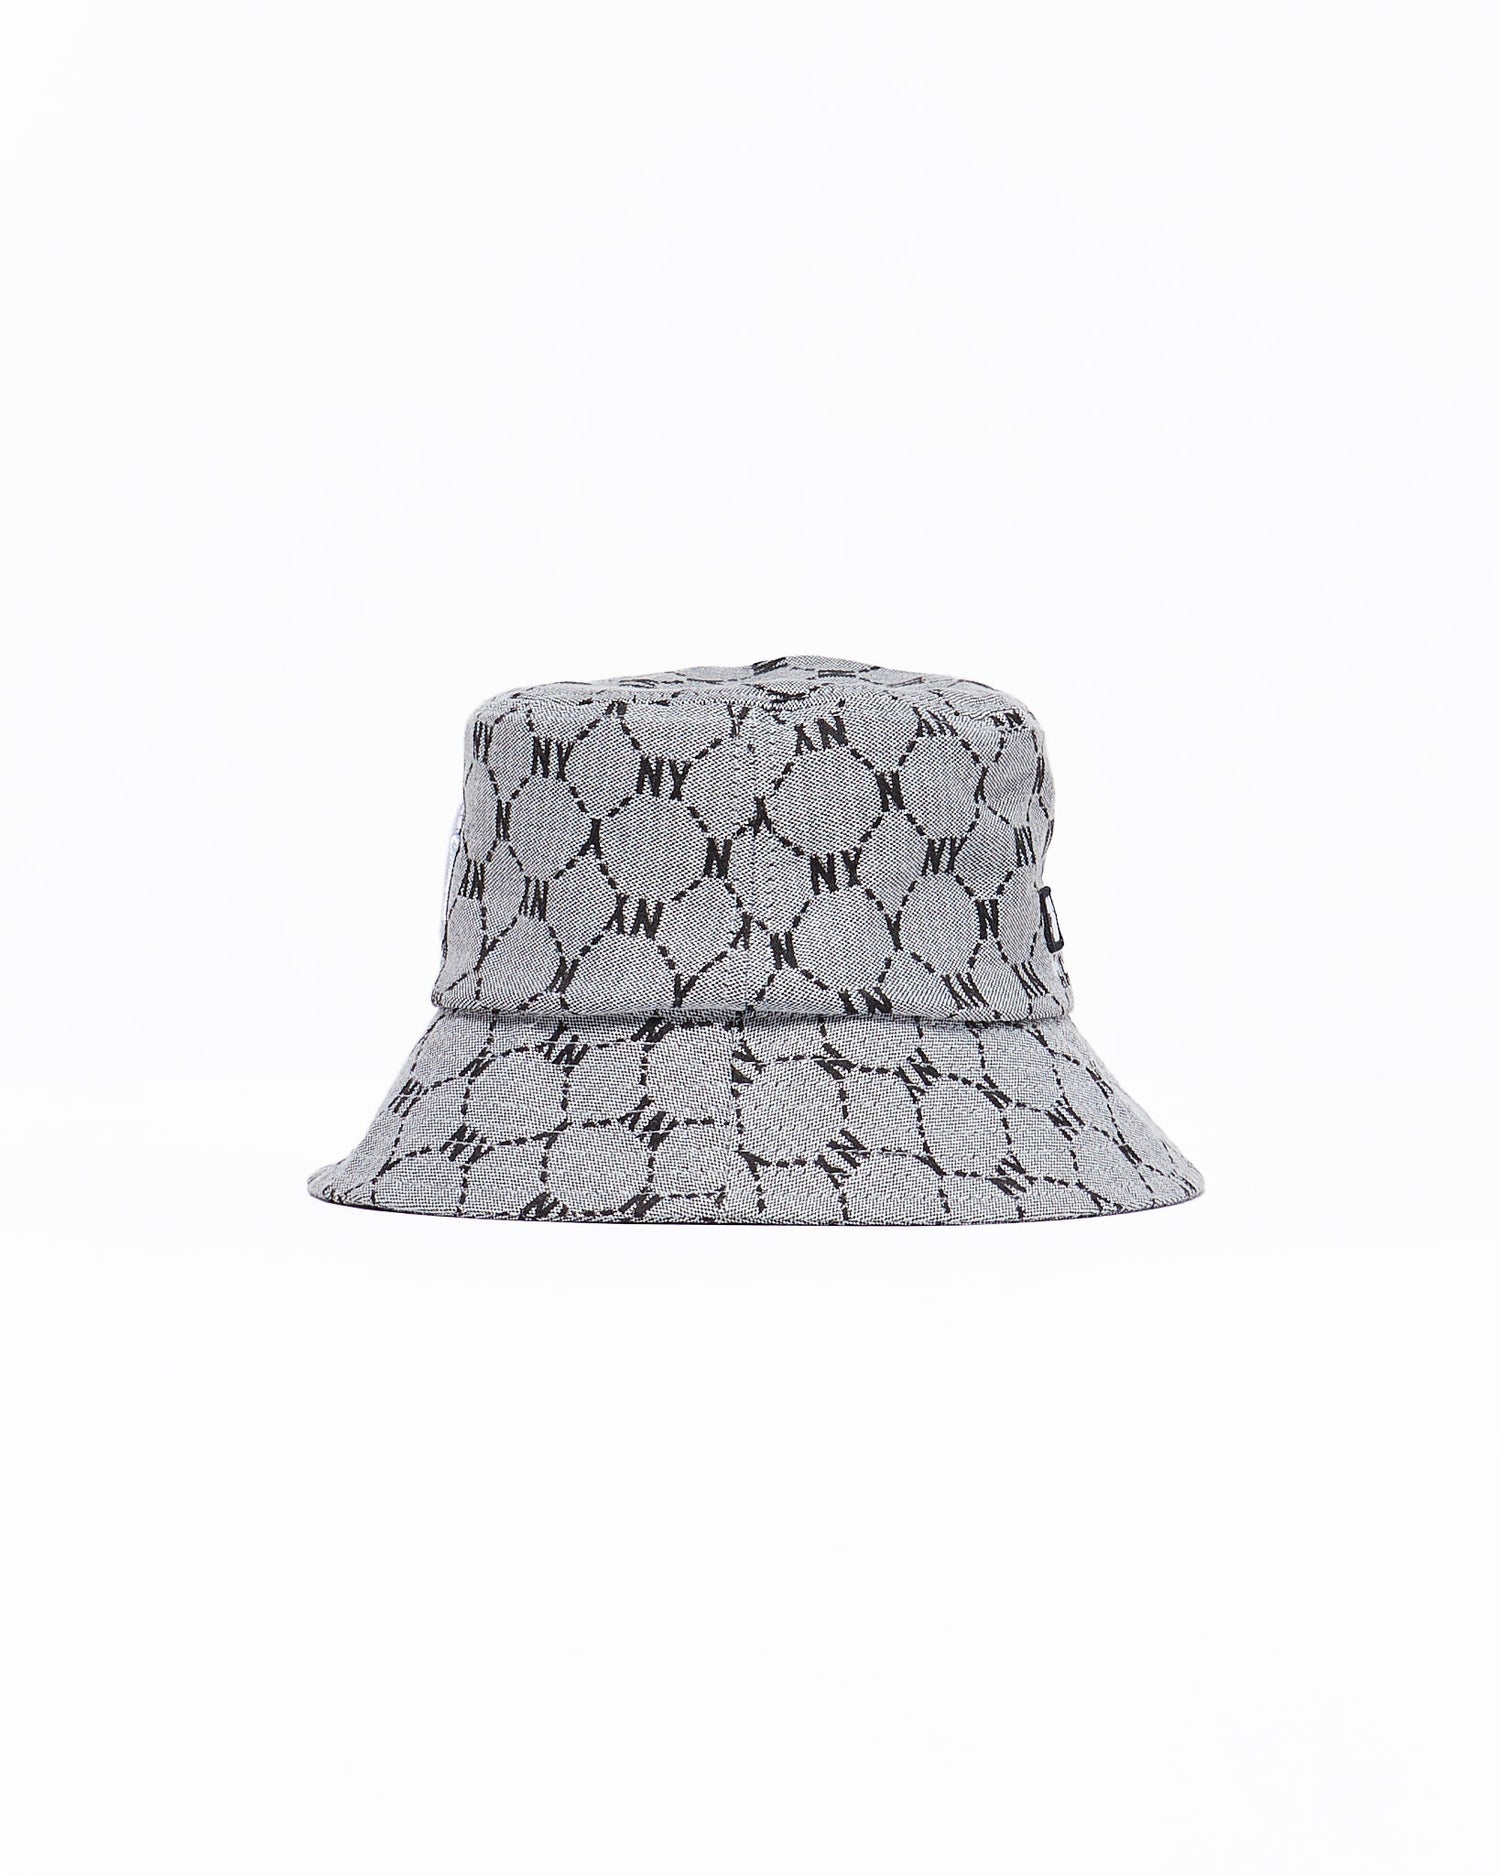 MOI OUTFIT-NY Monogram Bucket Hat 12.90